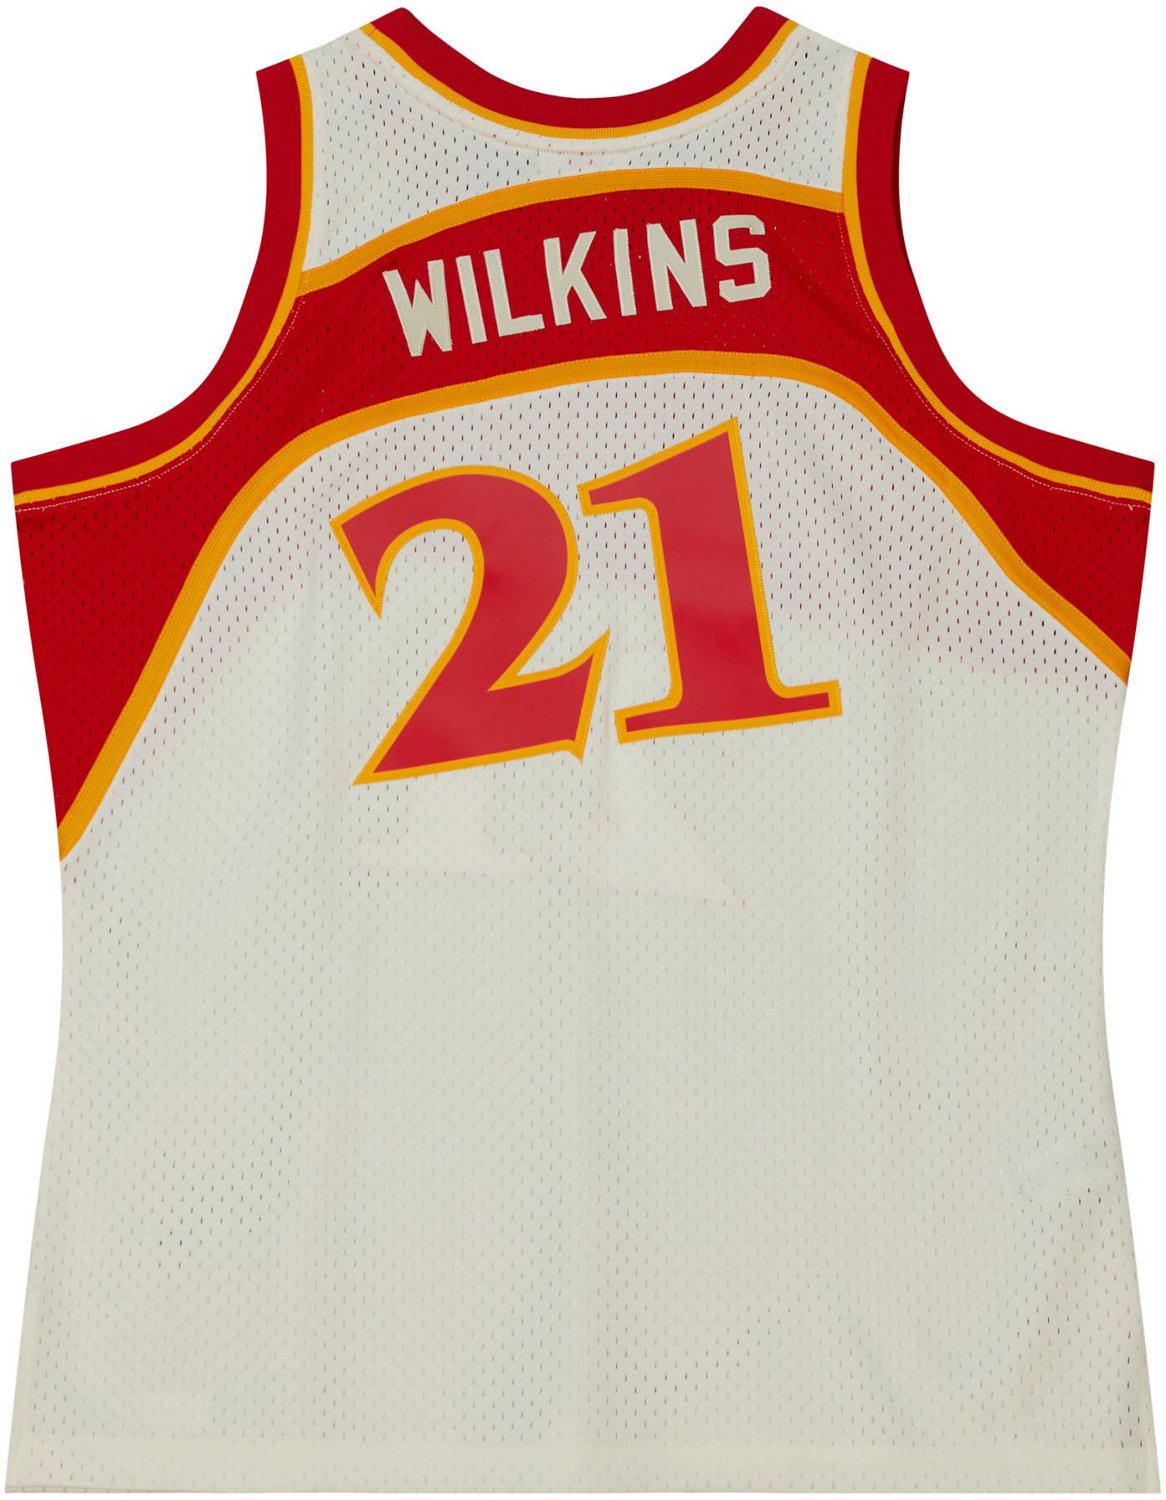 1986 - 1987 Atlanta Hawks Home Throwback Basketball Jersey from Mitchell and Ness, with #21 and 'Wilkins' on The Jersey (Dominique Wilkins)